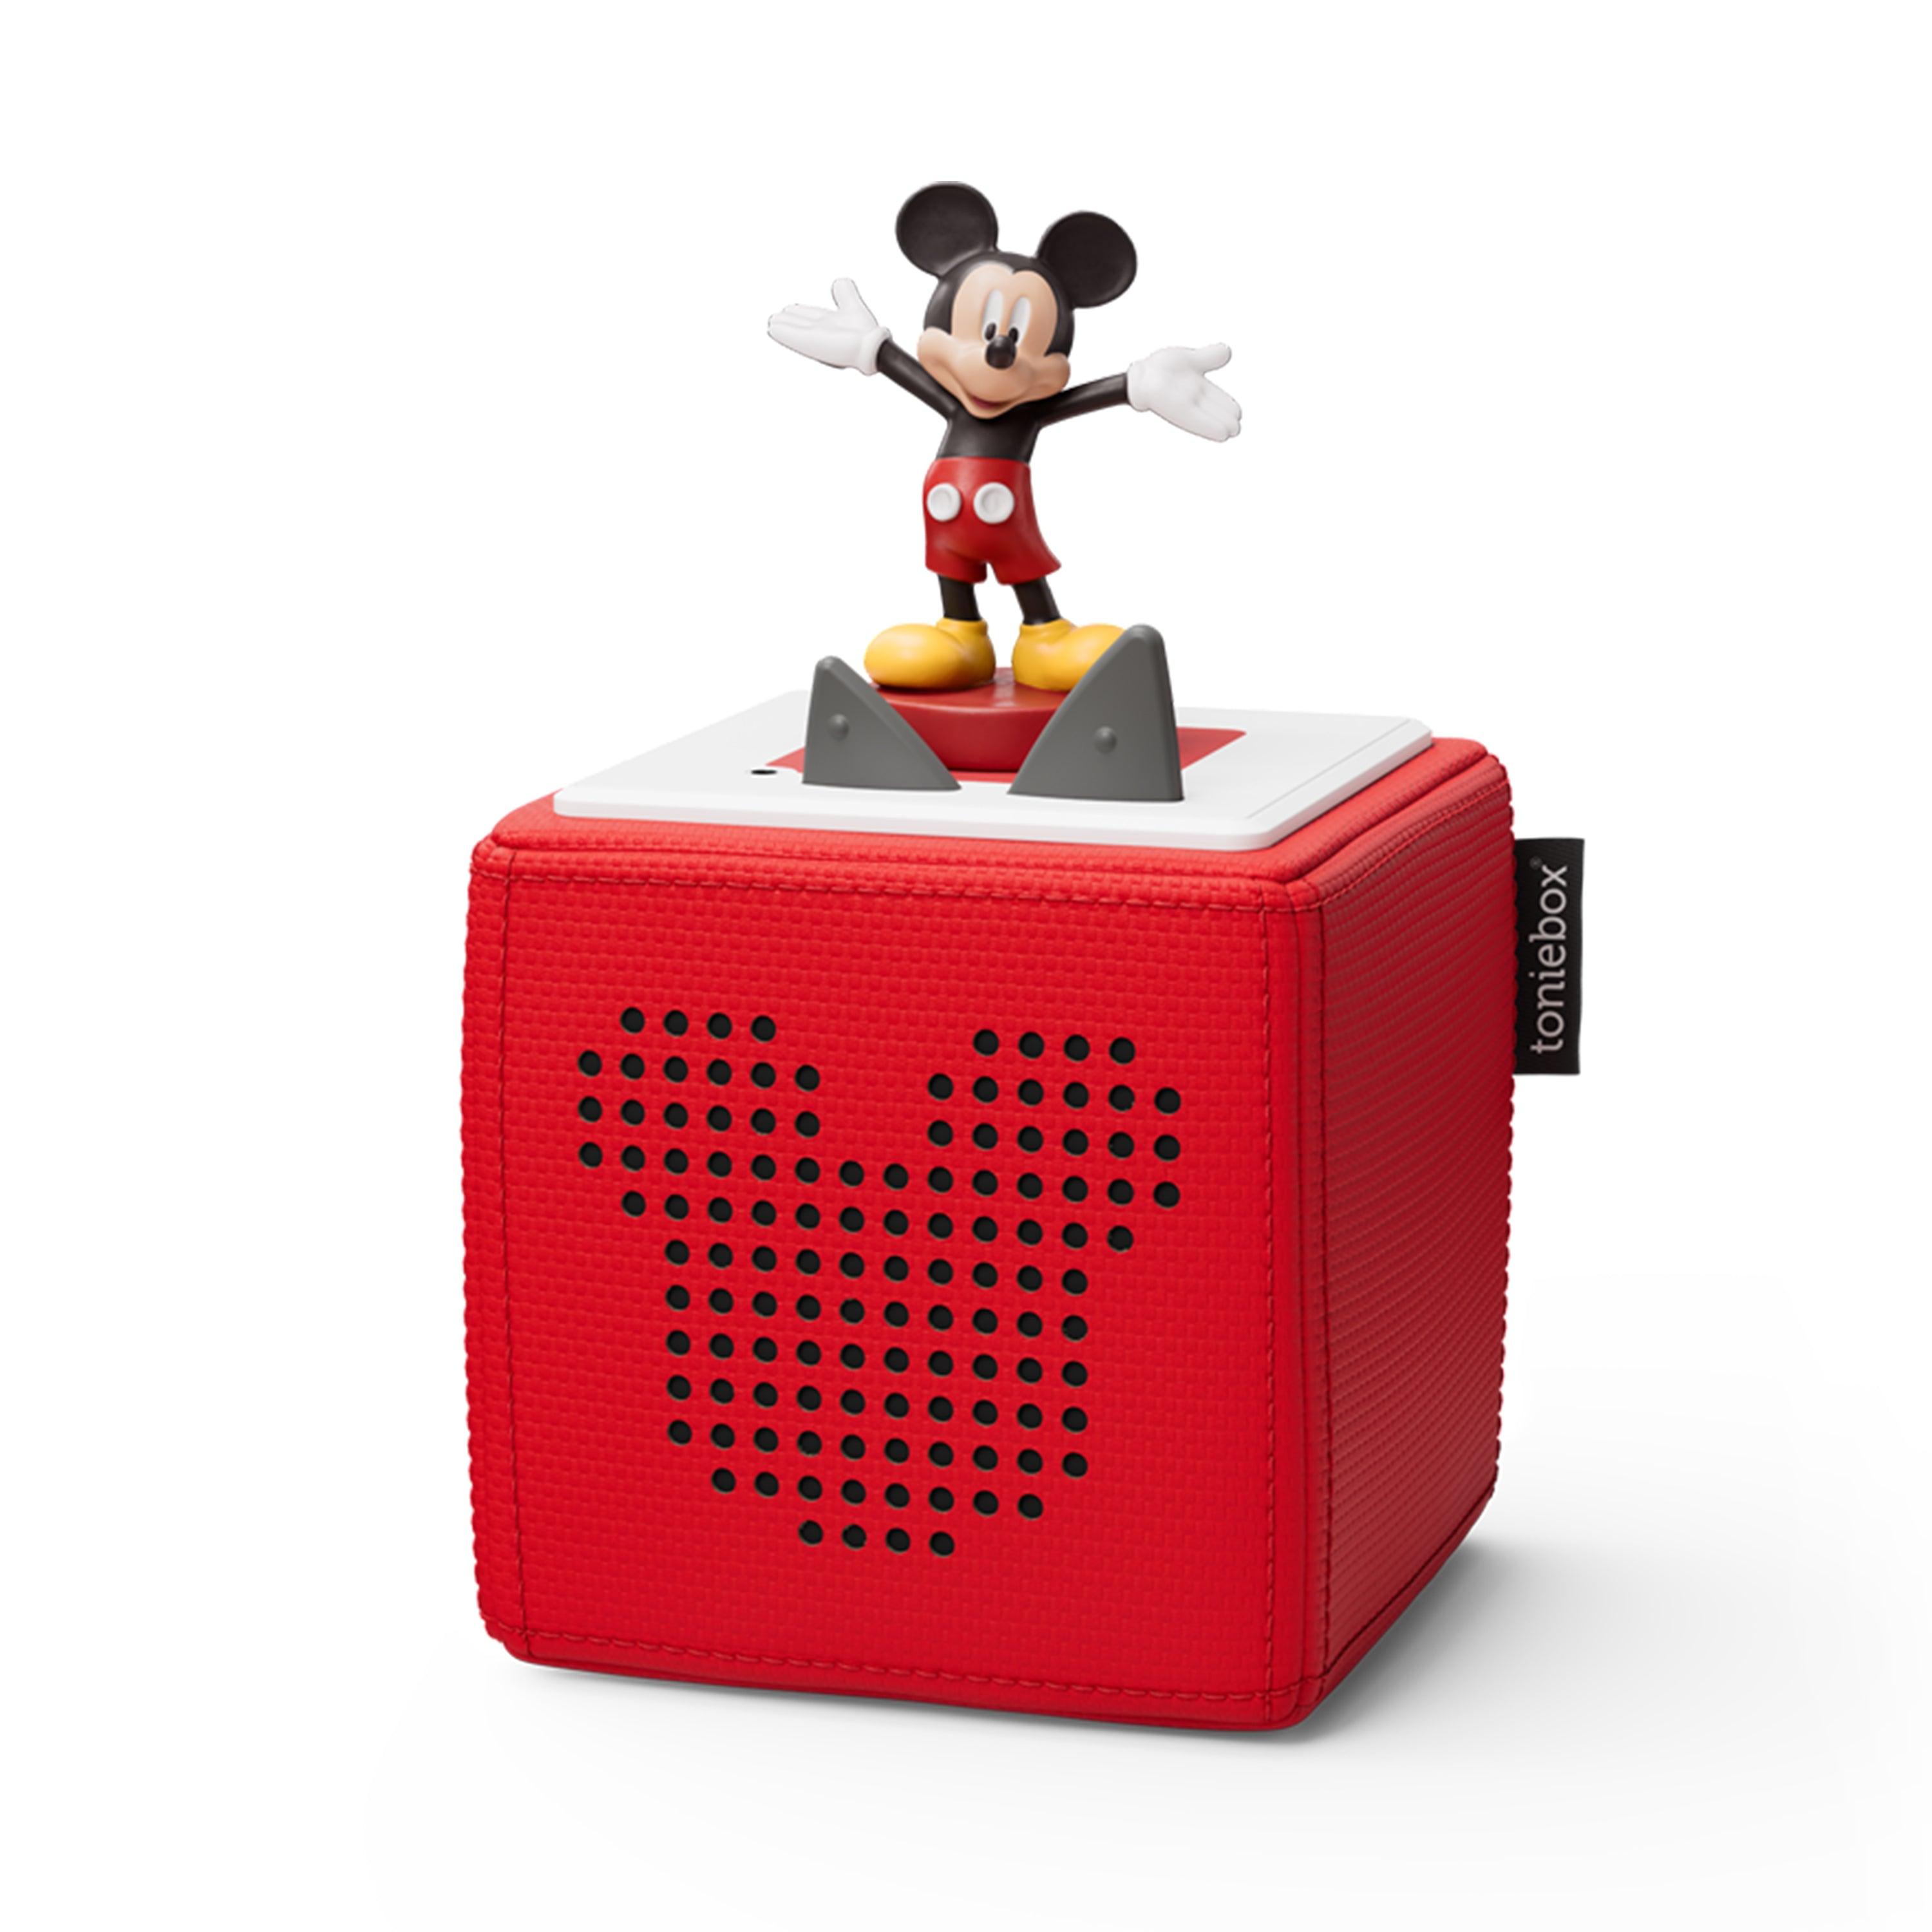 Tonies Limited Edition Mickey Mouse Toniebox Starter Set w/ free Headphones!